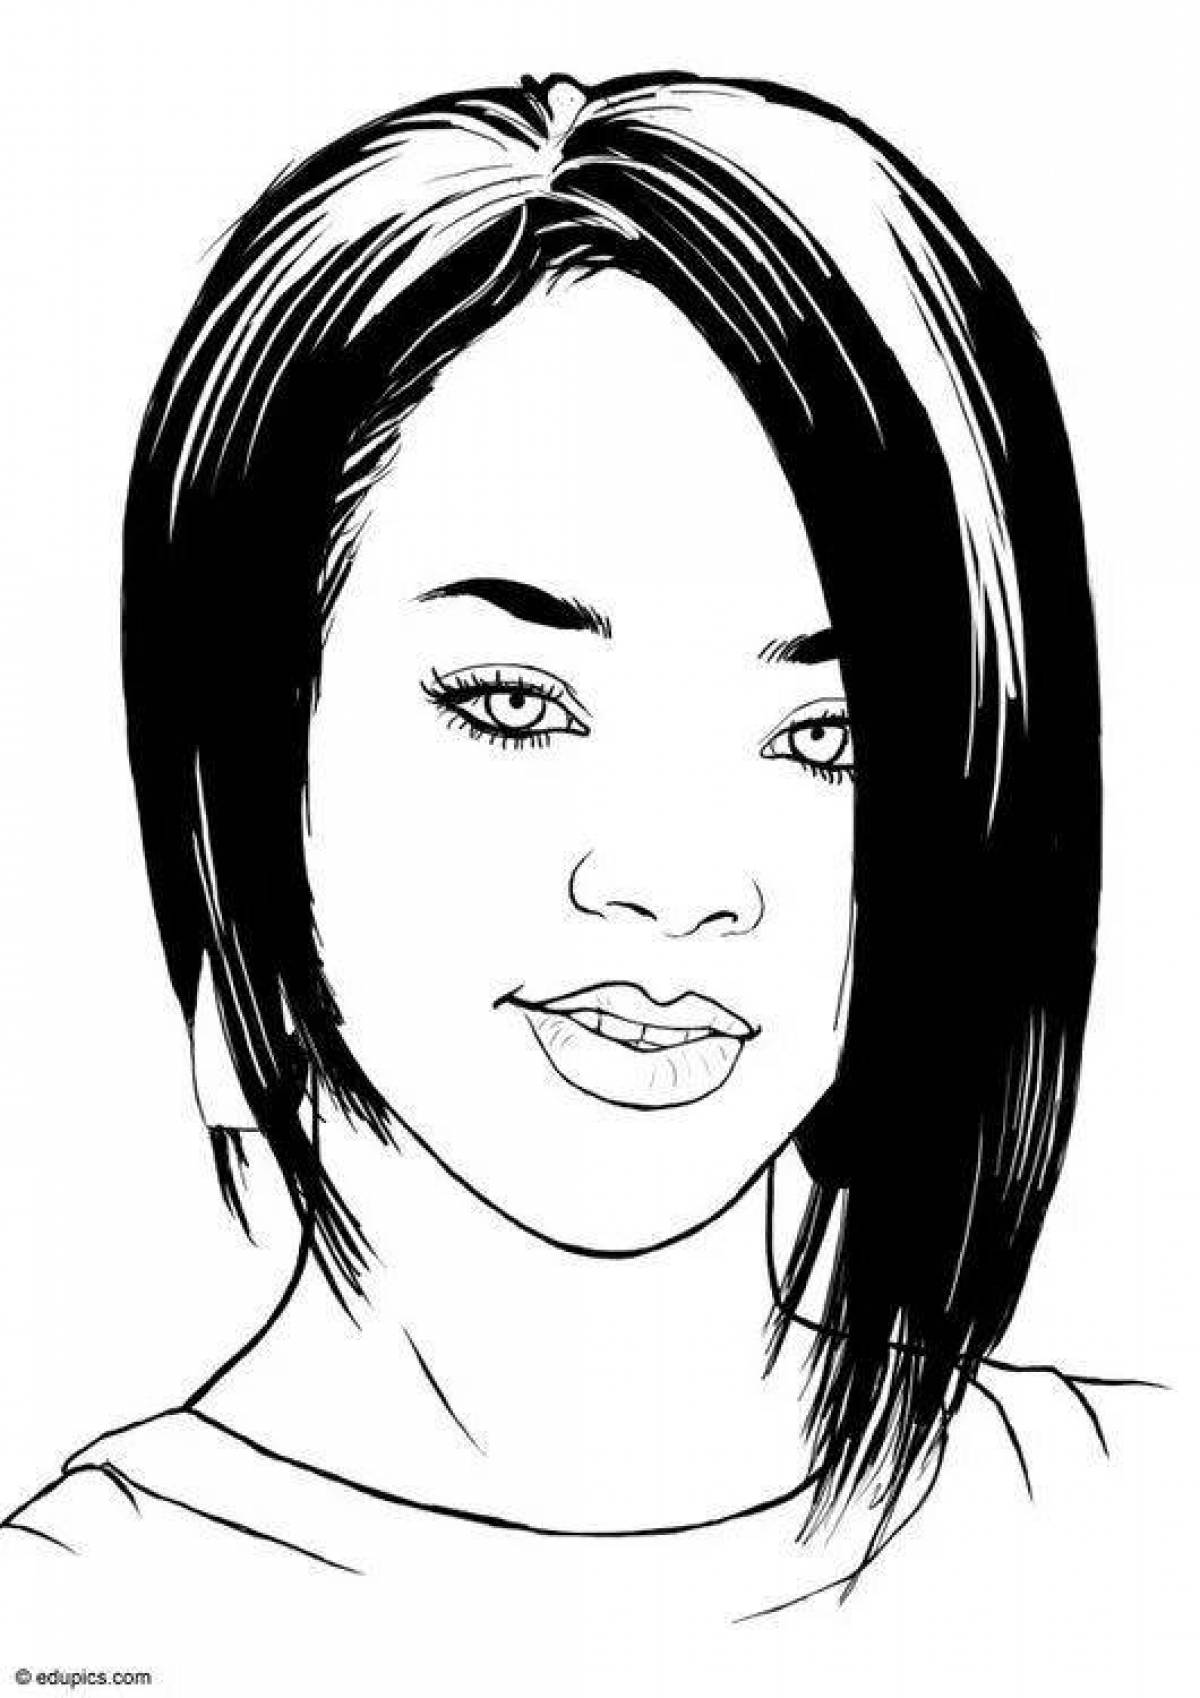 Rihanna's animated coloring page